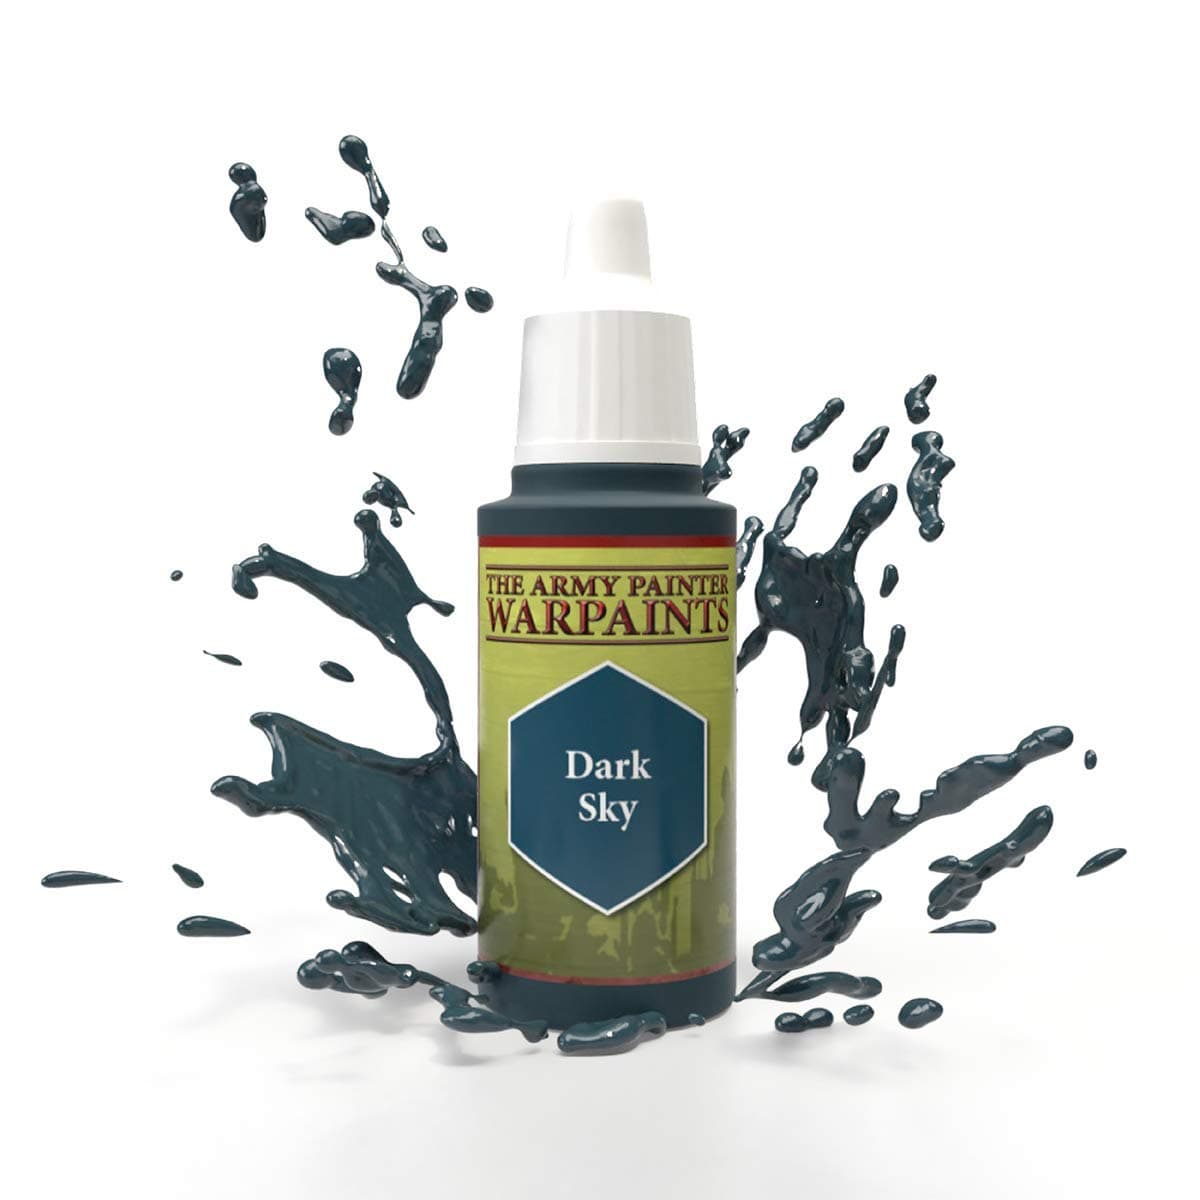 The Army Painter Accessories The Army Painter Warpaints: Dark Sky 18ml